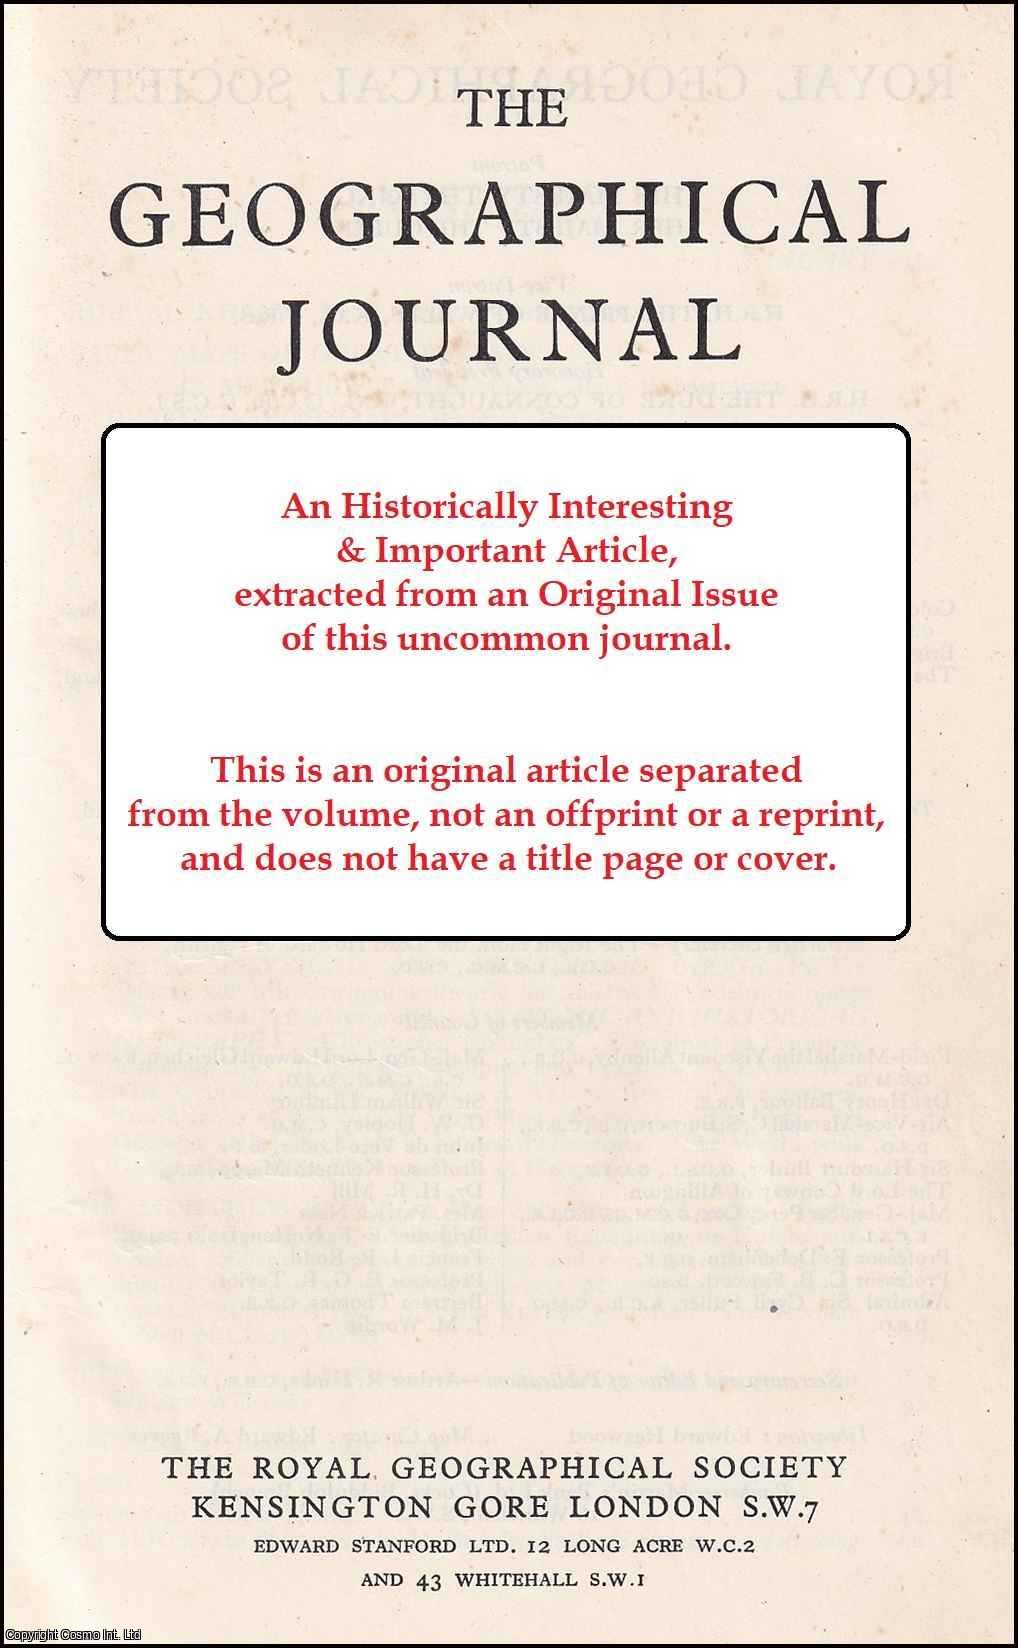 C. E. N. Bromehead - The Evidence for Ancient Mining. An original article from the Geographical Journal, 1940.